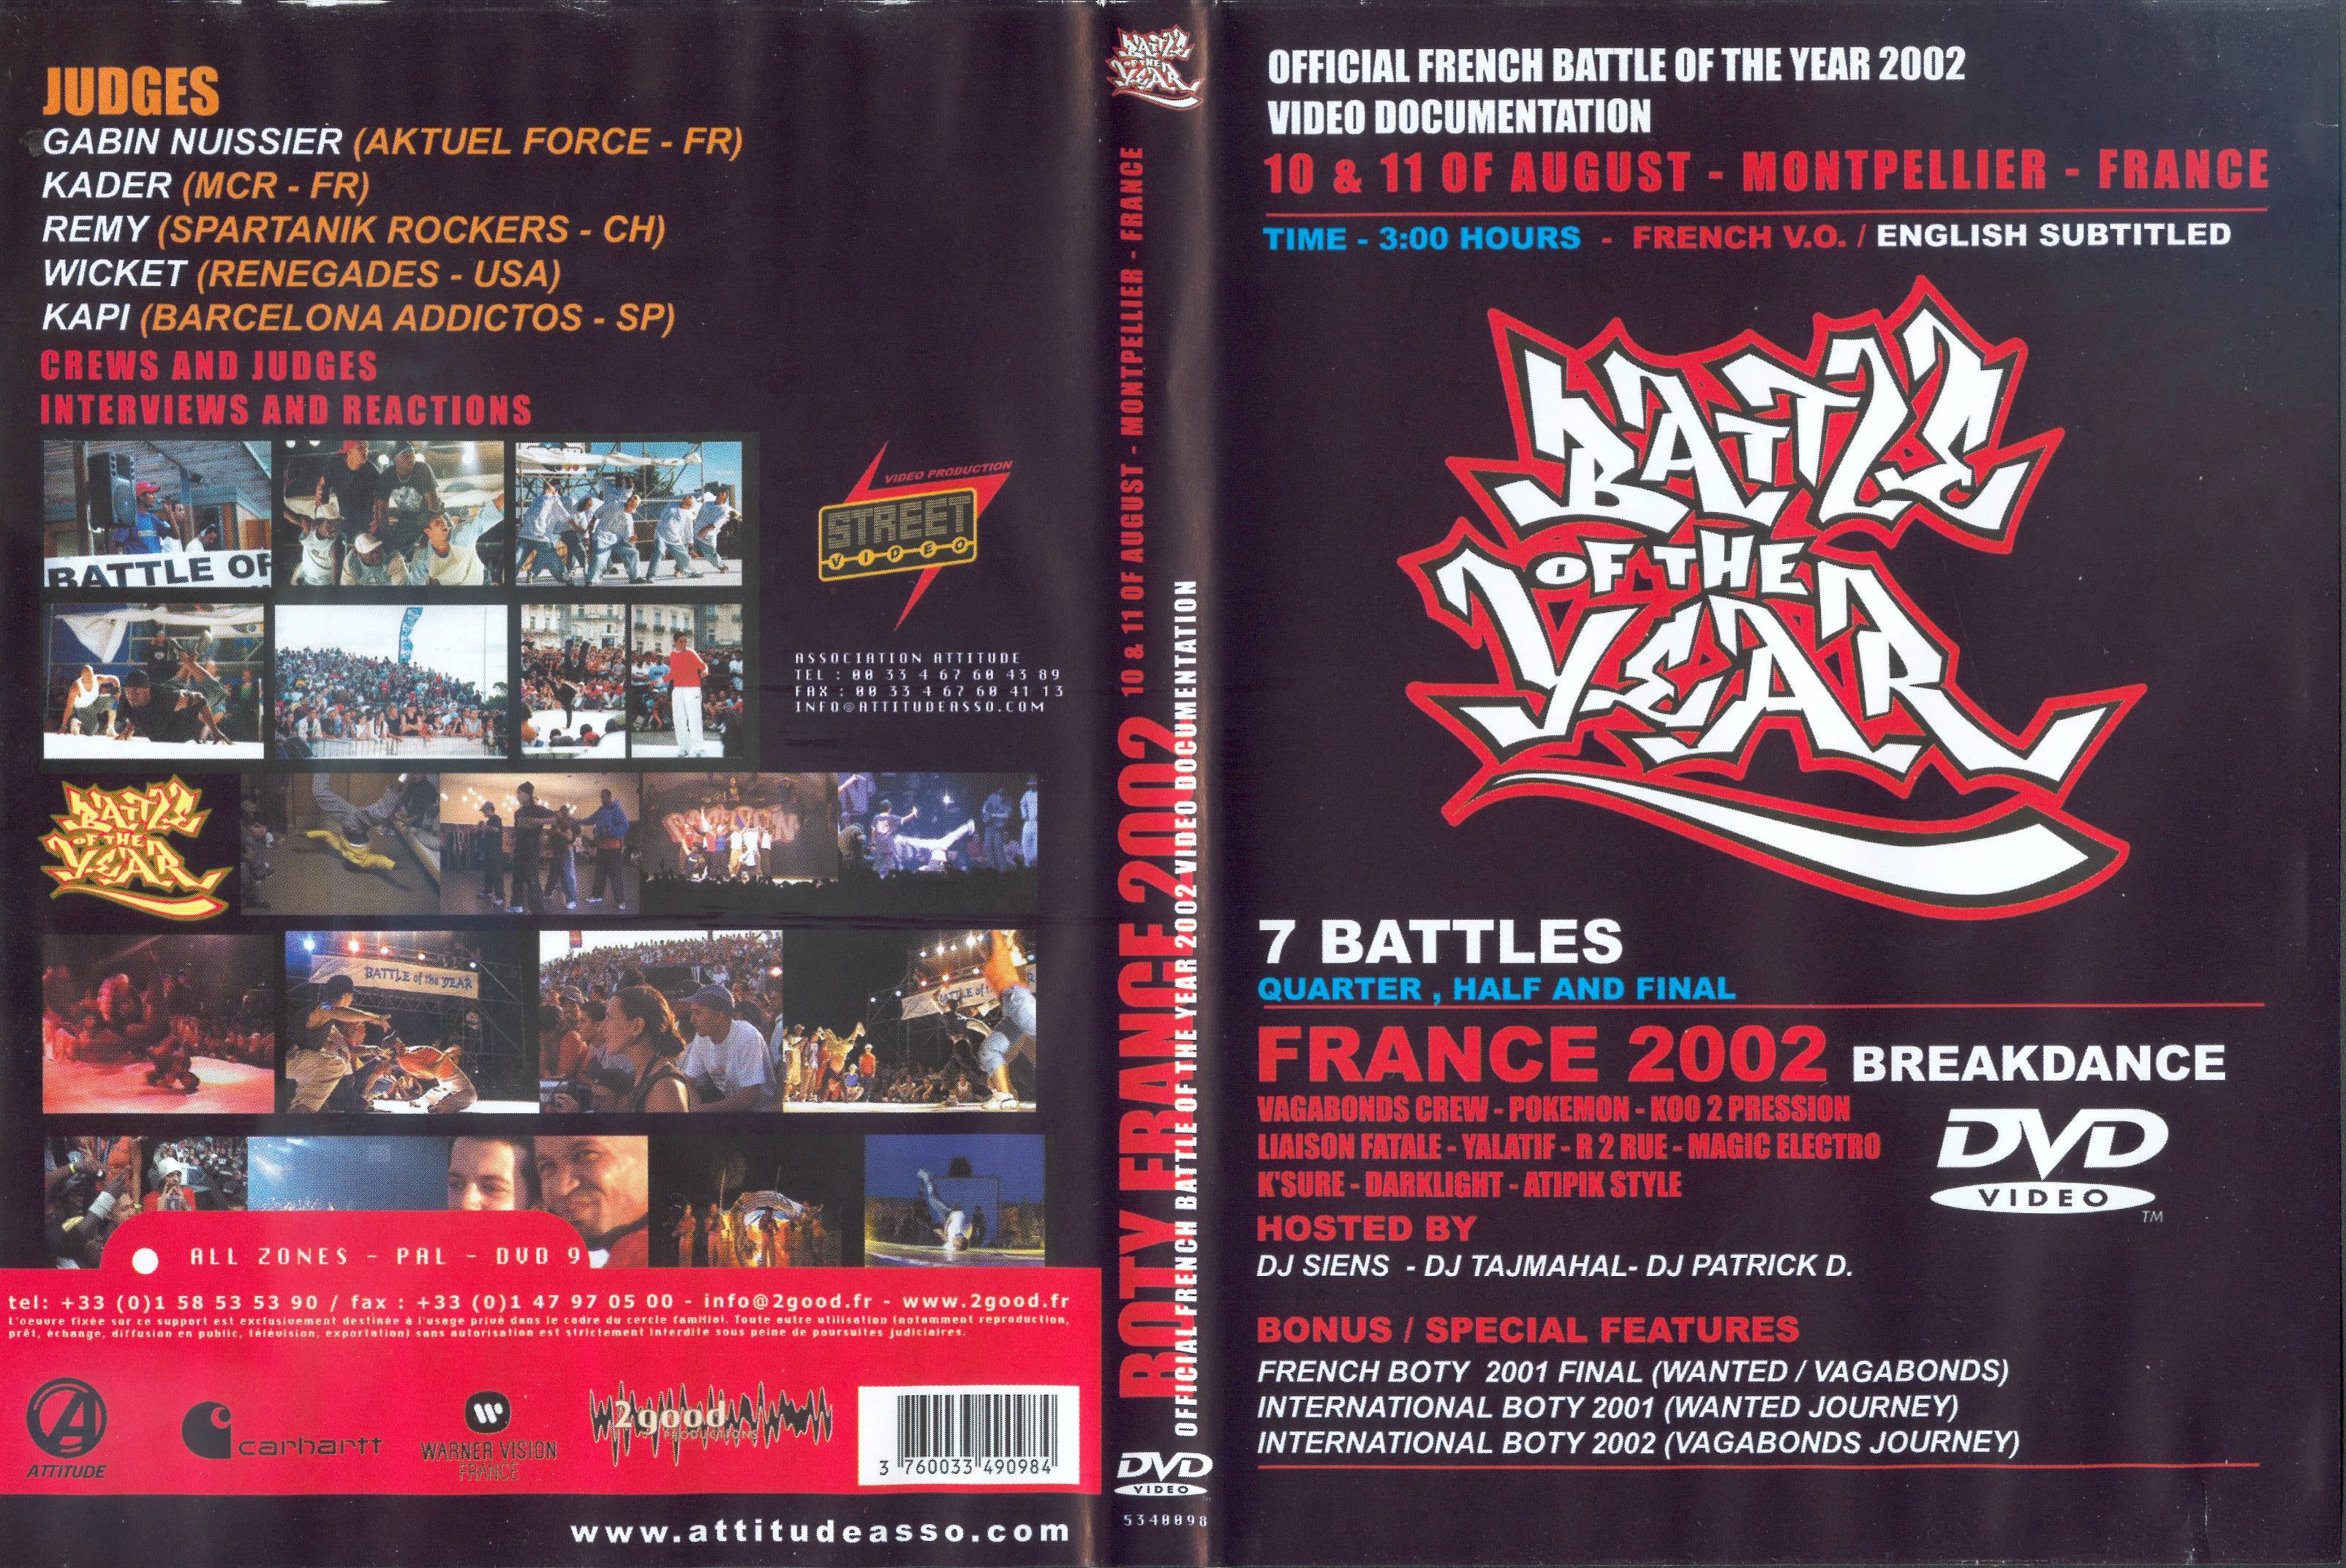 Jaquette DVD Battle of the year 2002